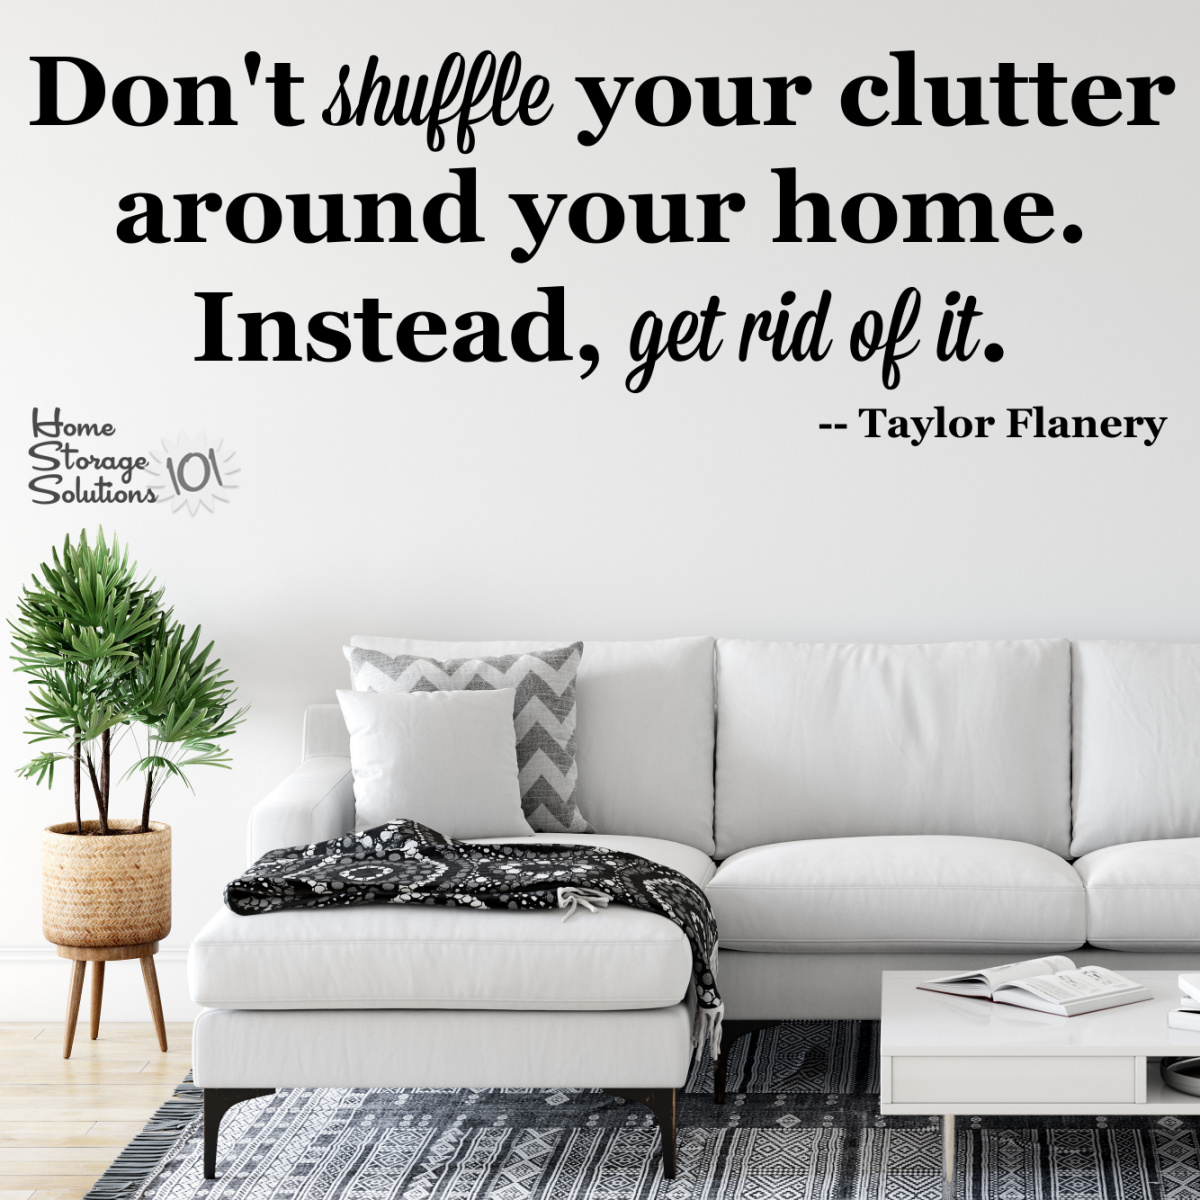 Don't shuffle your clutter around your home. Instead, get rid of it {on Home Storage Solutions 101}